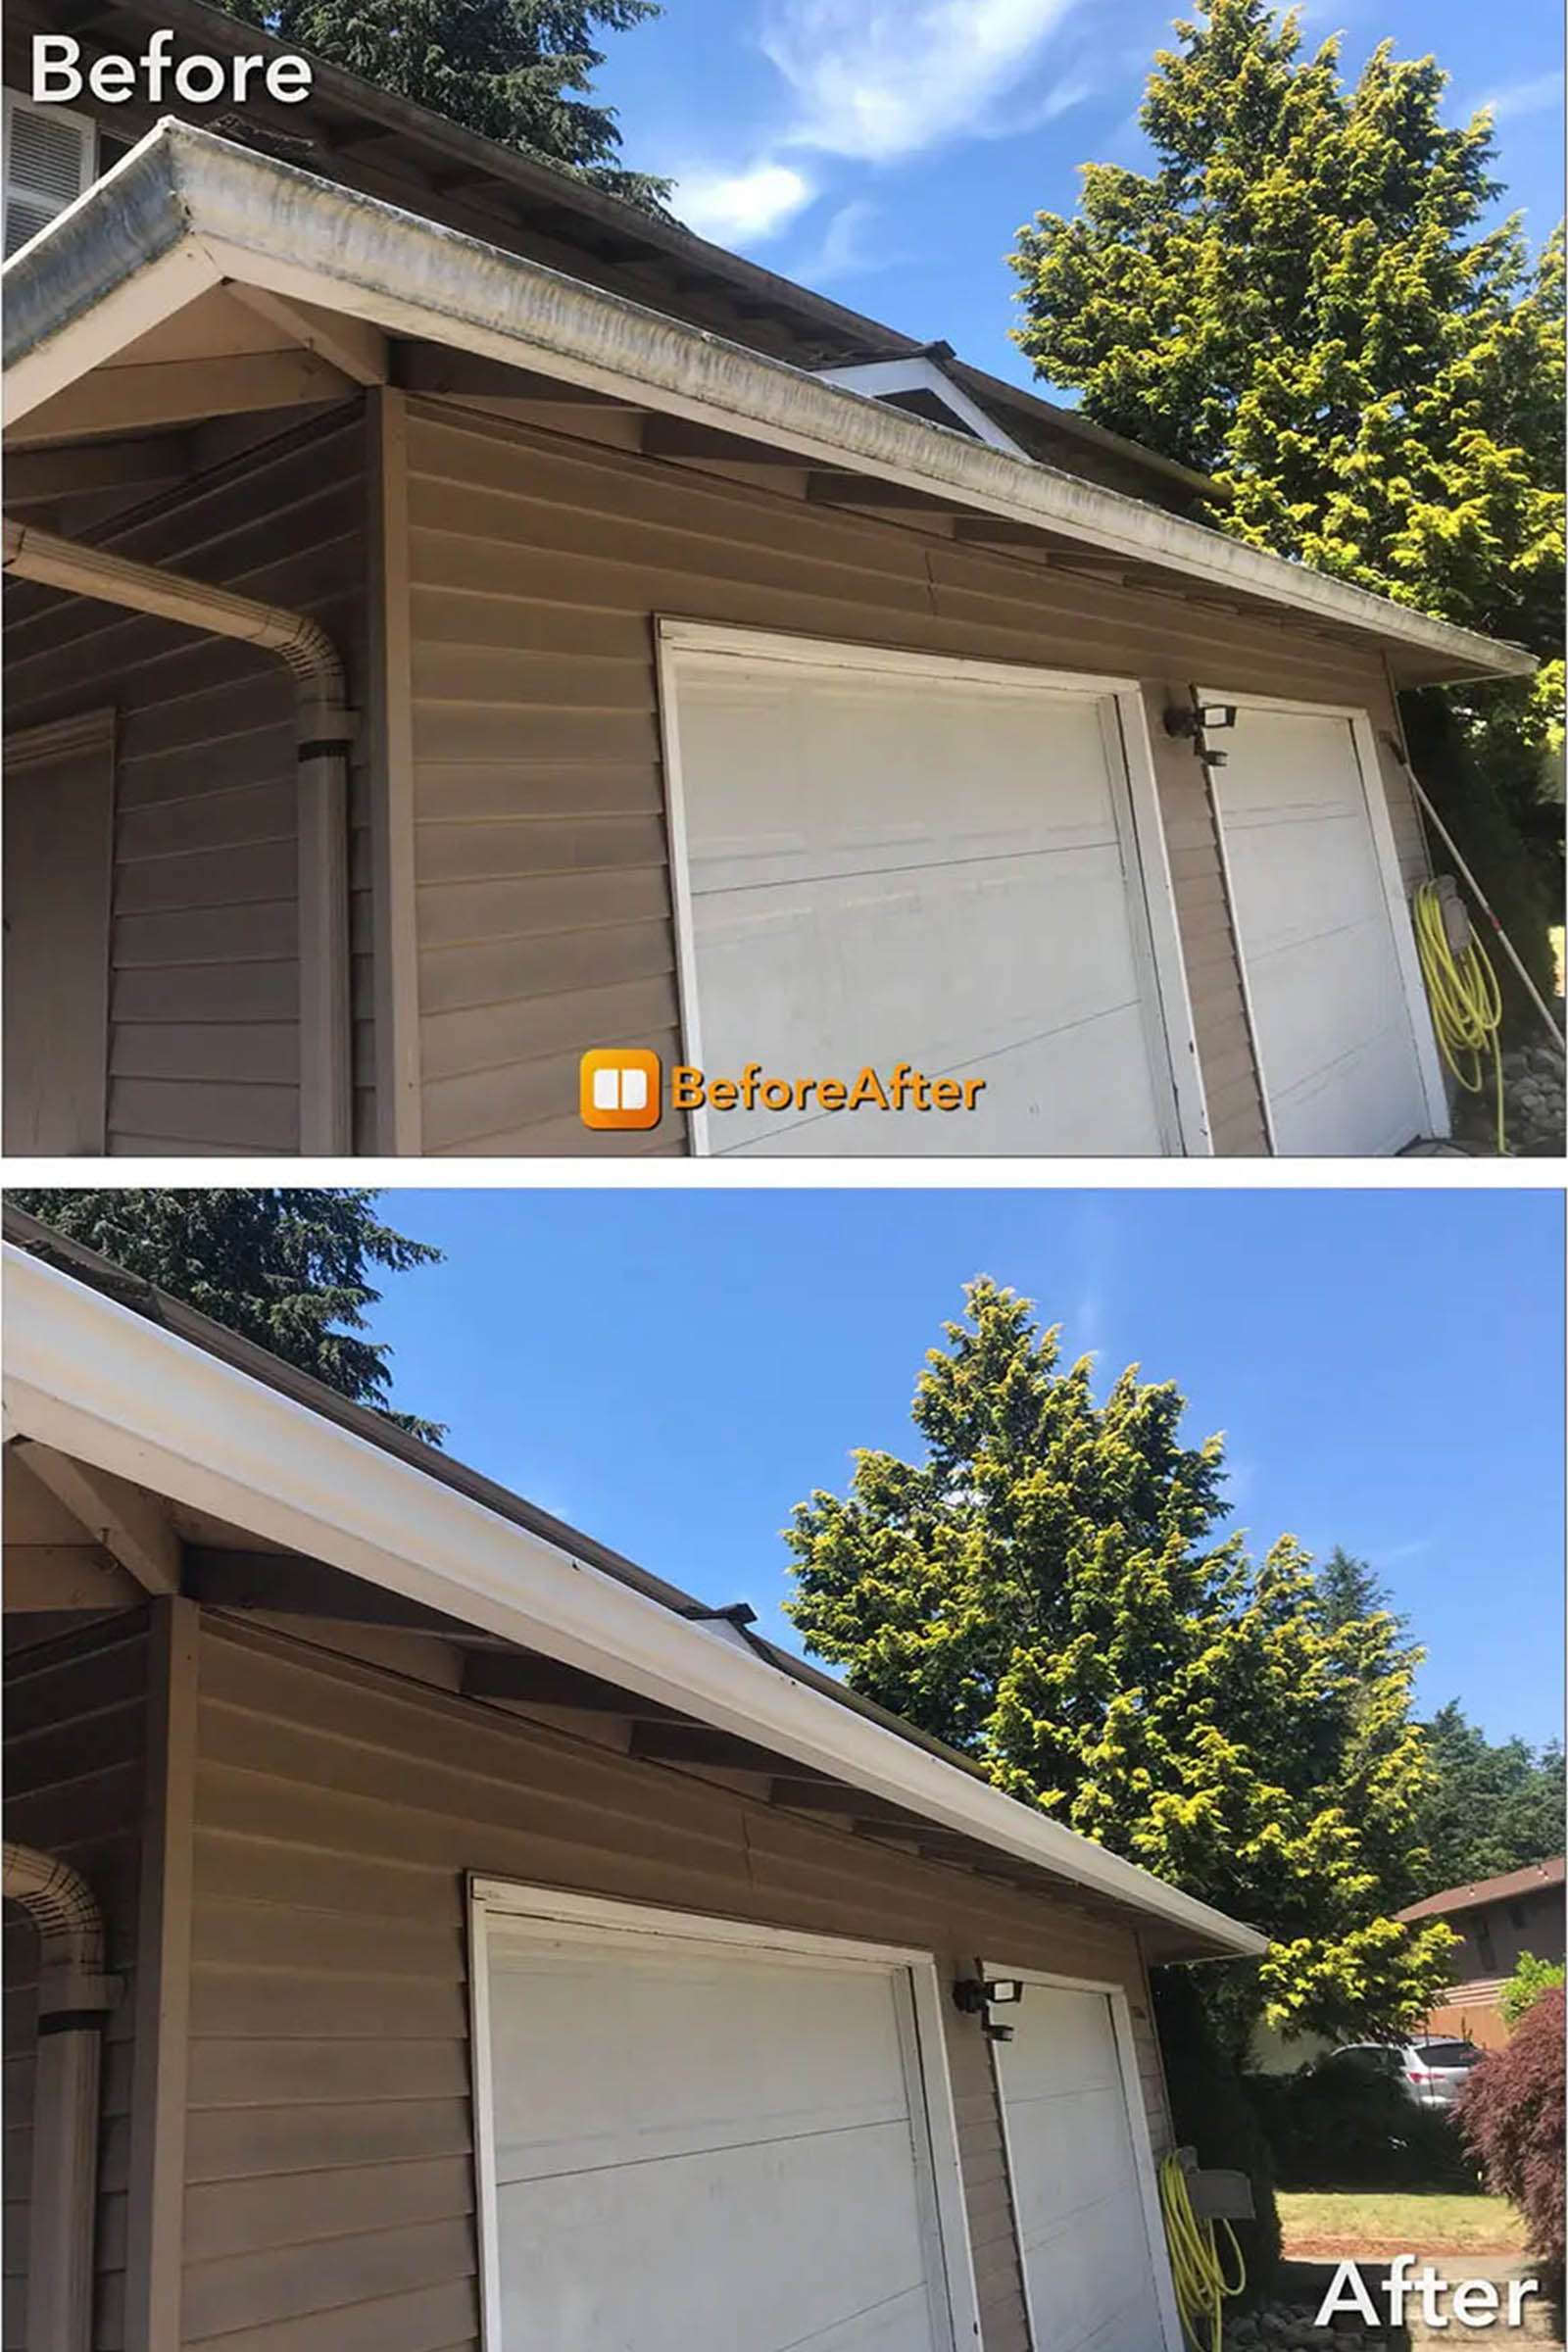 Rainier gutter cleaning before and after